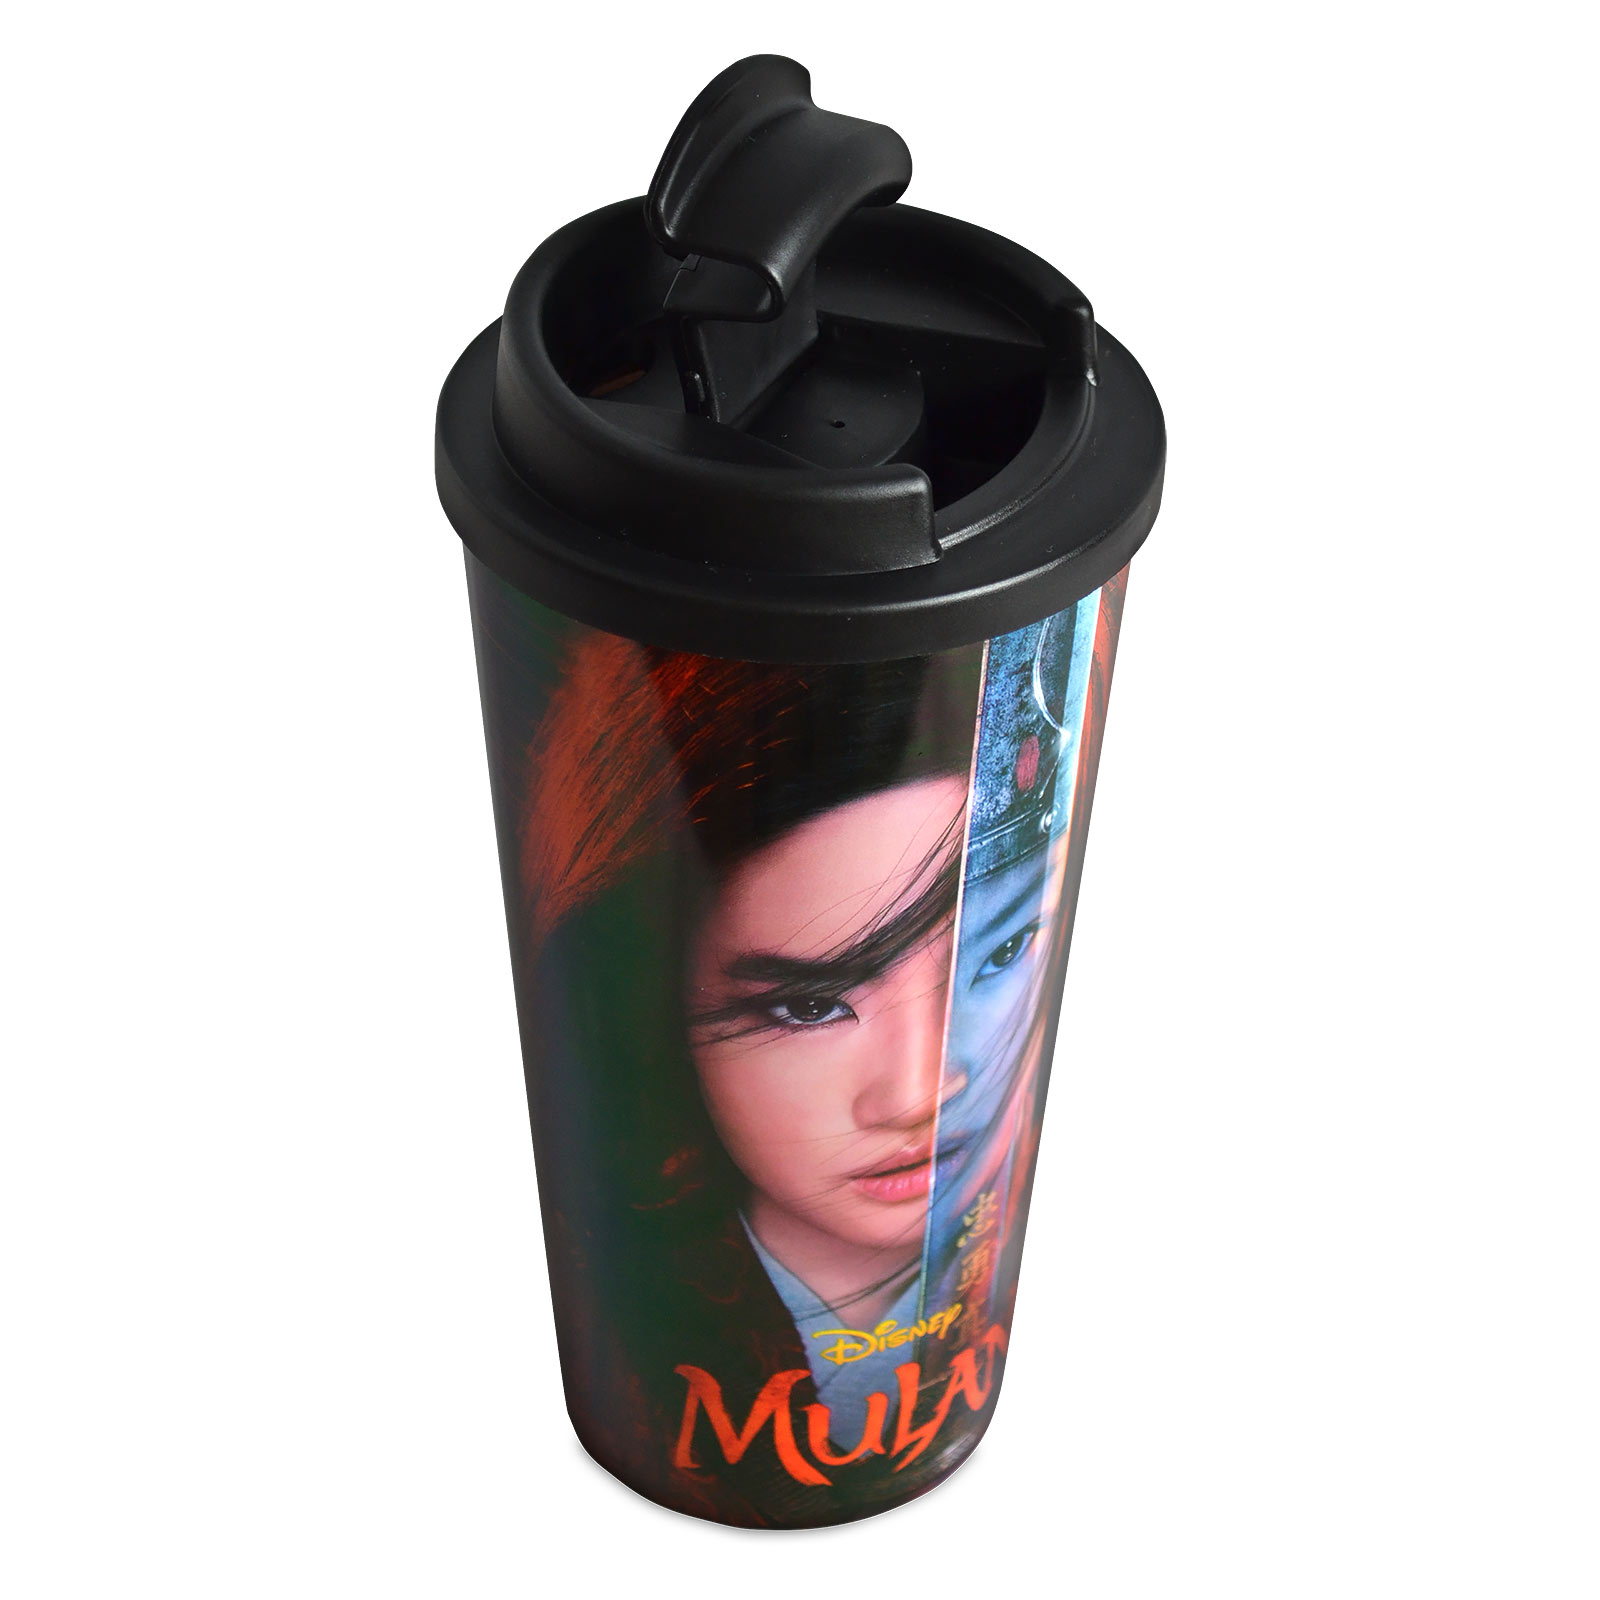 Mulan Thermo To Go Becher